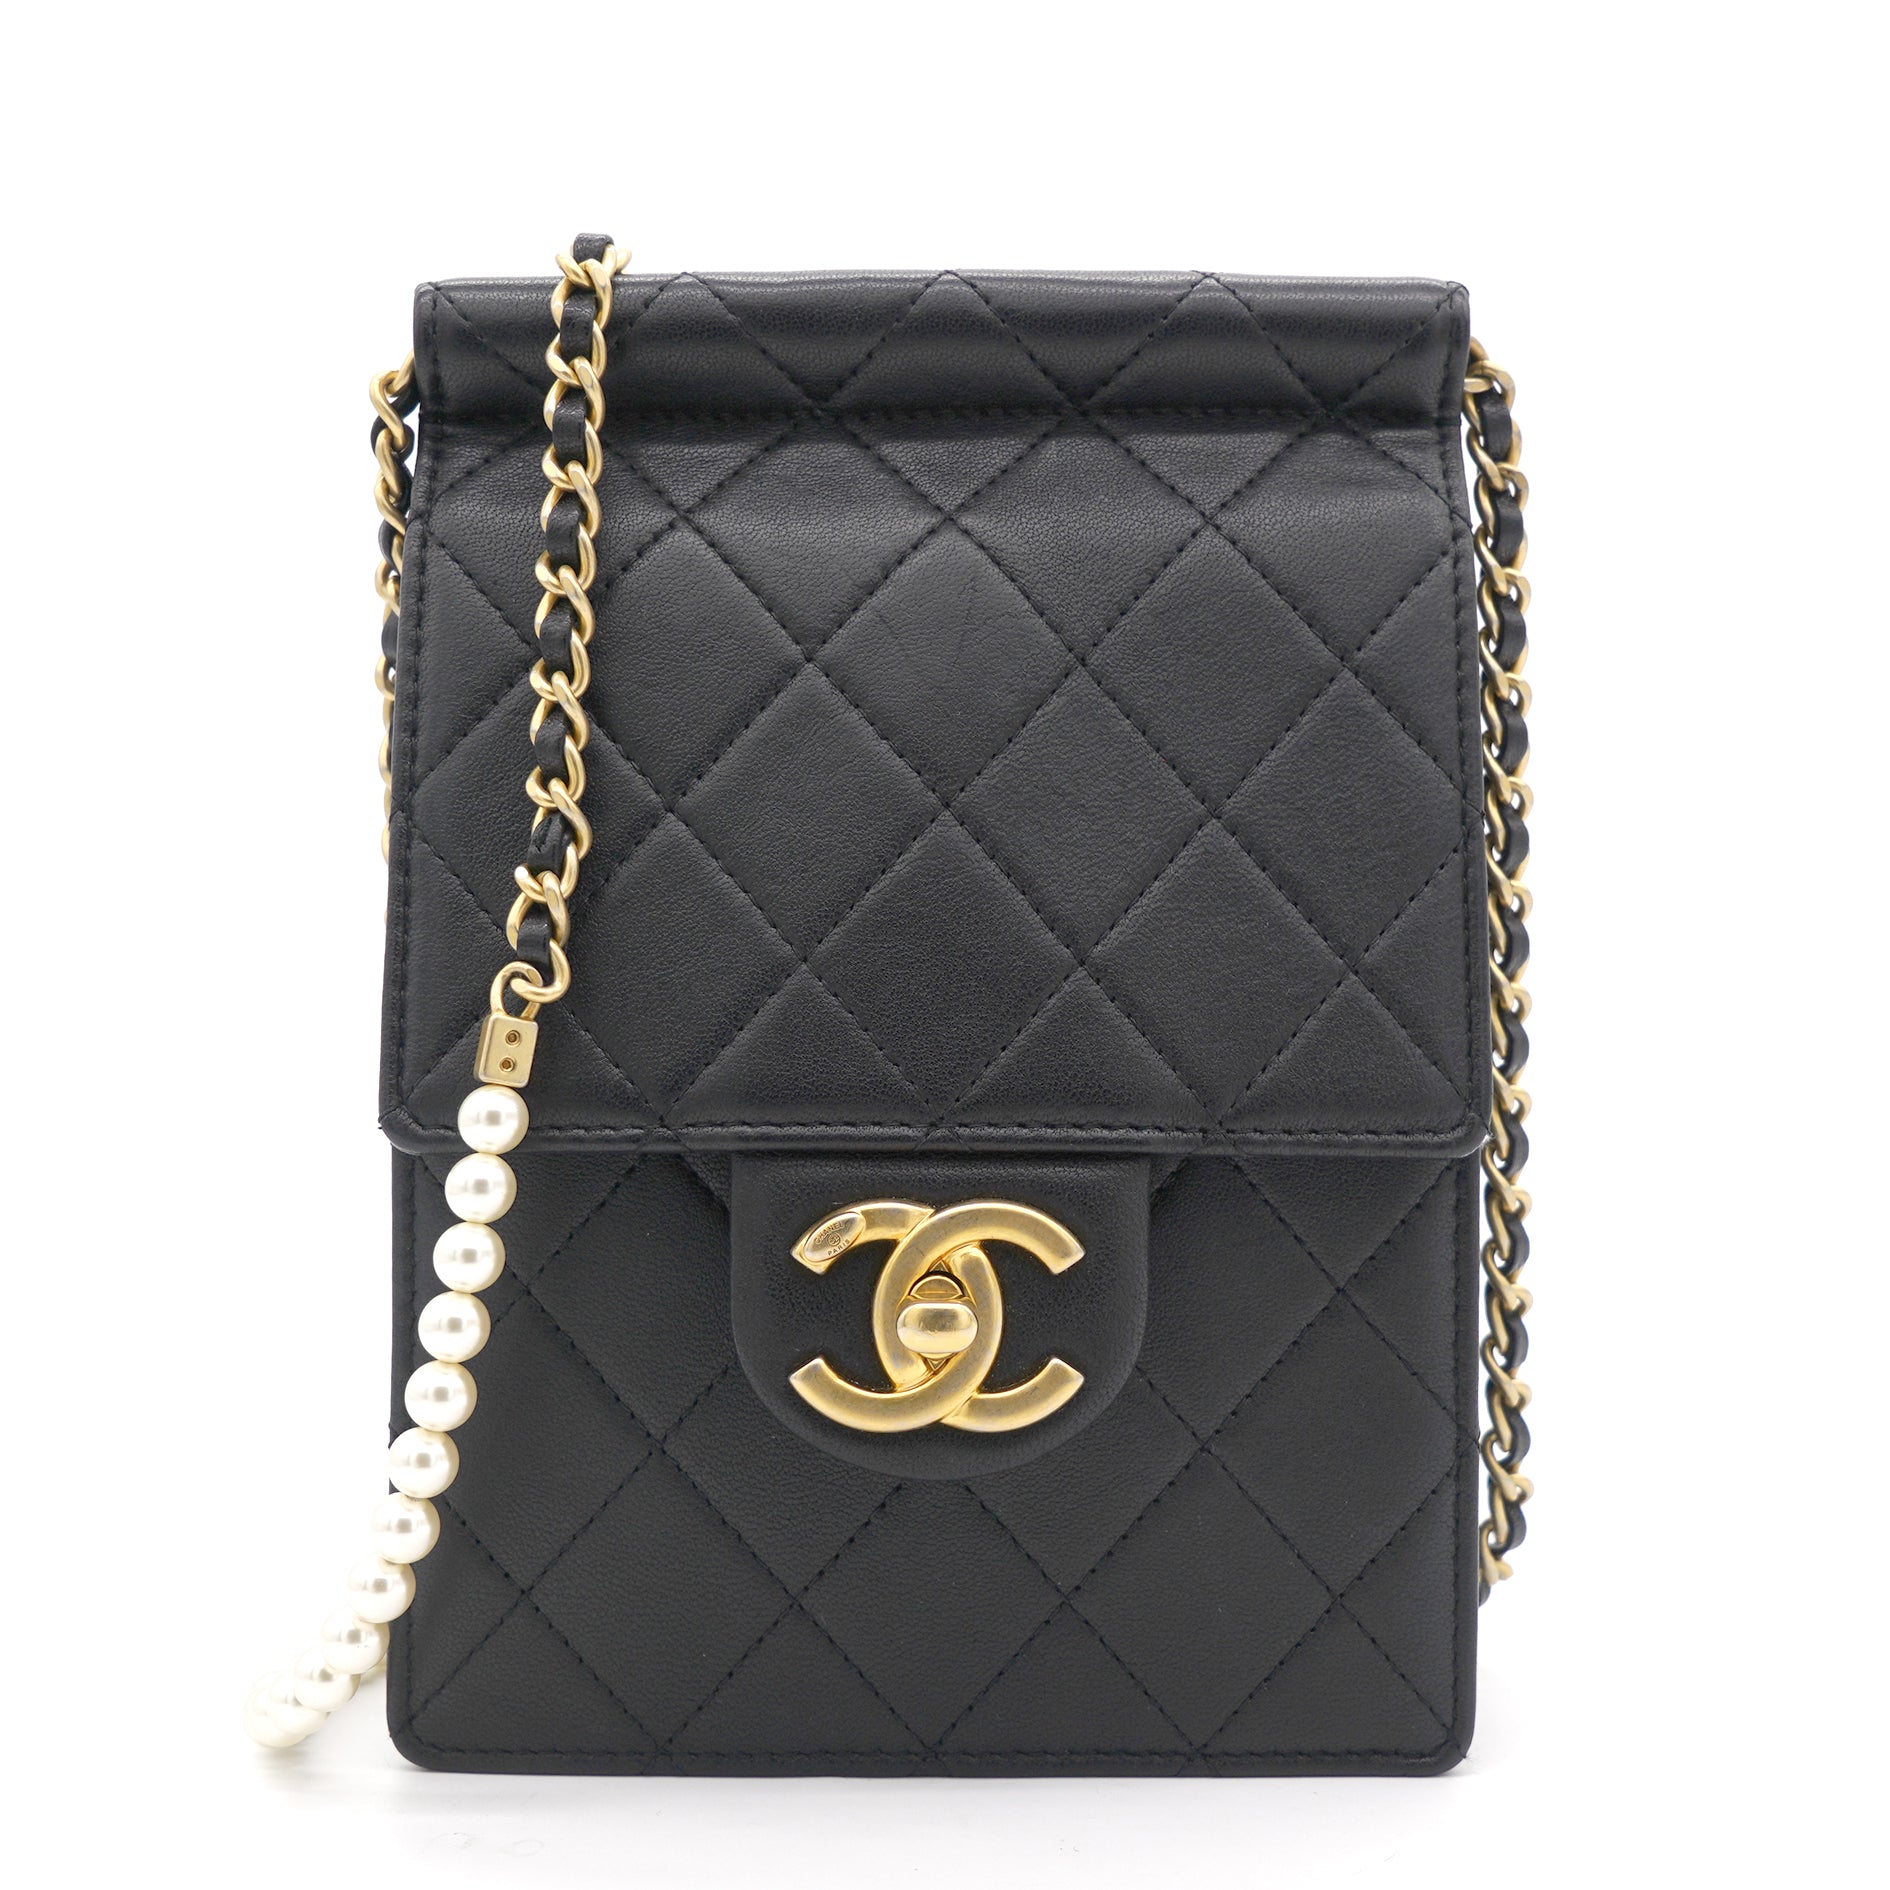 Authentic Chanel White Vertical Flap Bag with Pearl